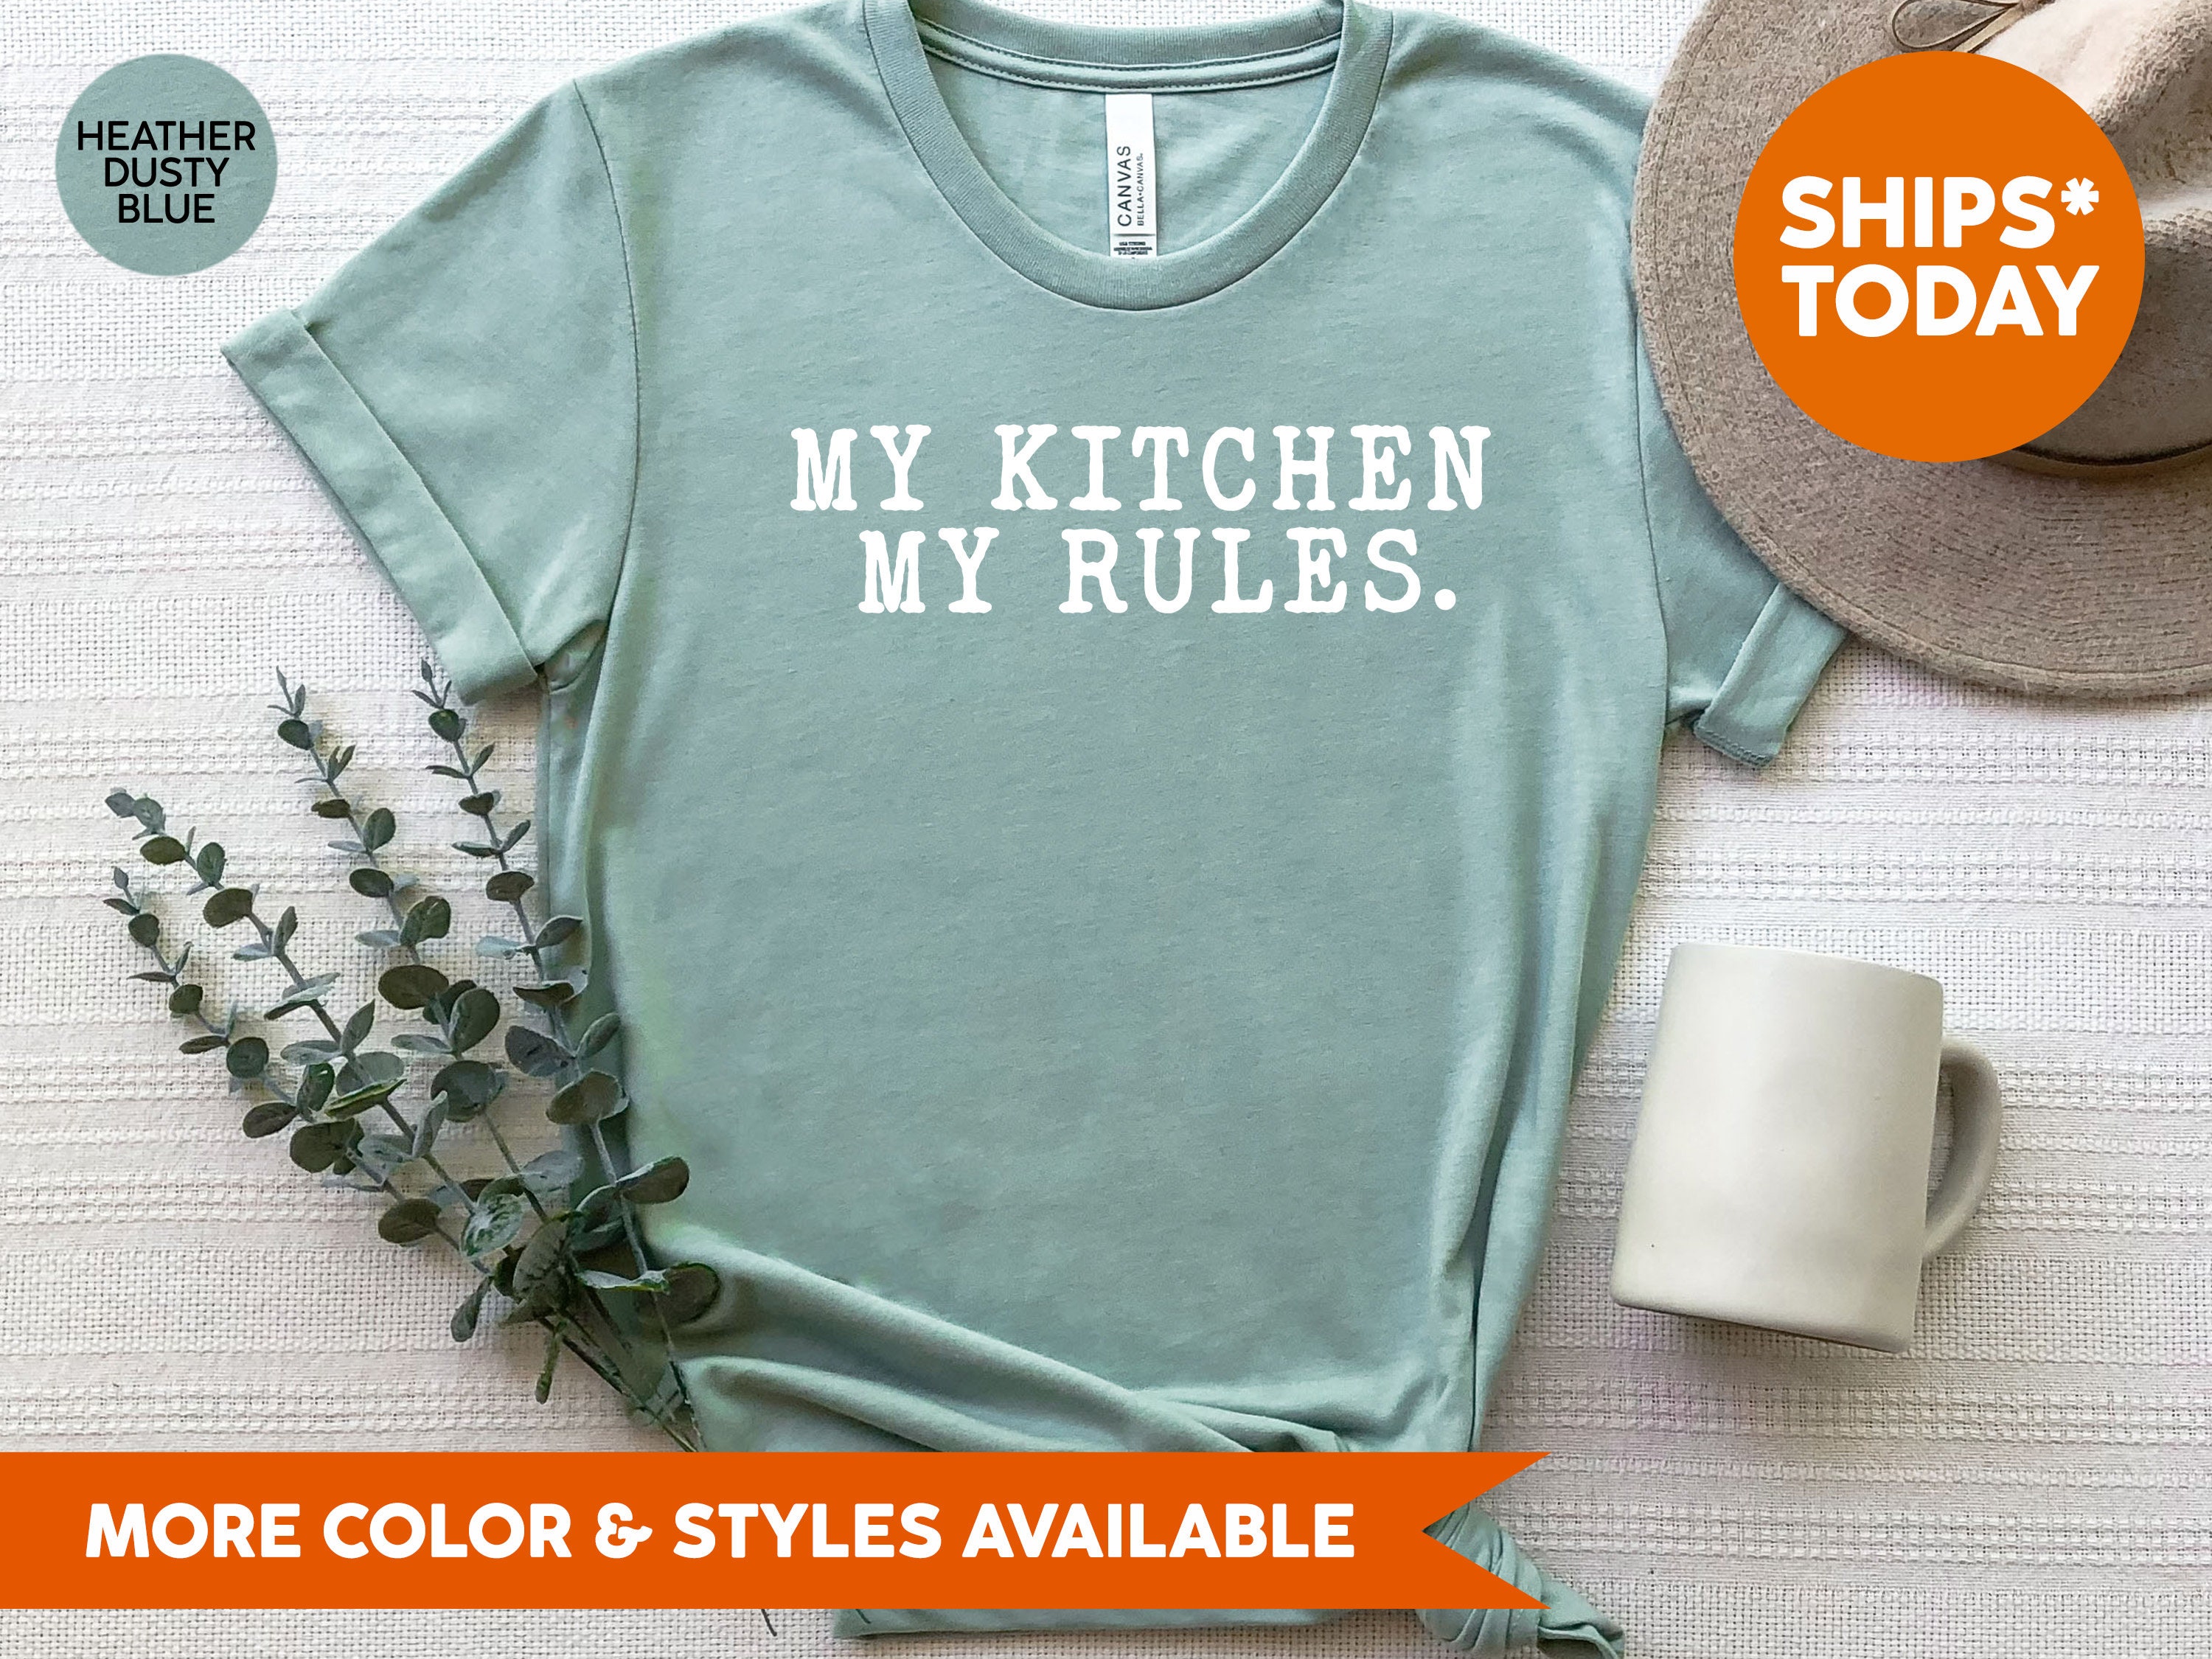 My Kitchen My Rules Tshirt - Chef Shirt - Cooking Tee - Funny Kitchen Gifts - Chef Gifts for Women - Gift for Baker - Cooking Gift - 3211p